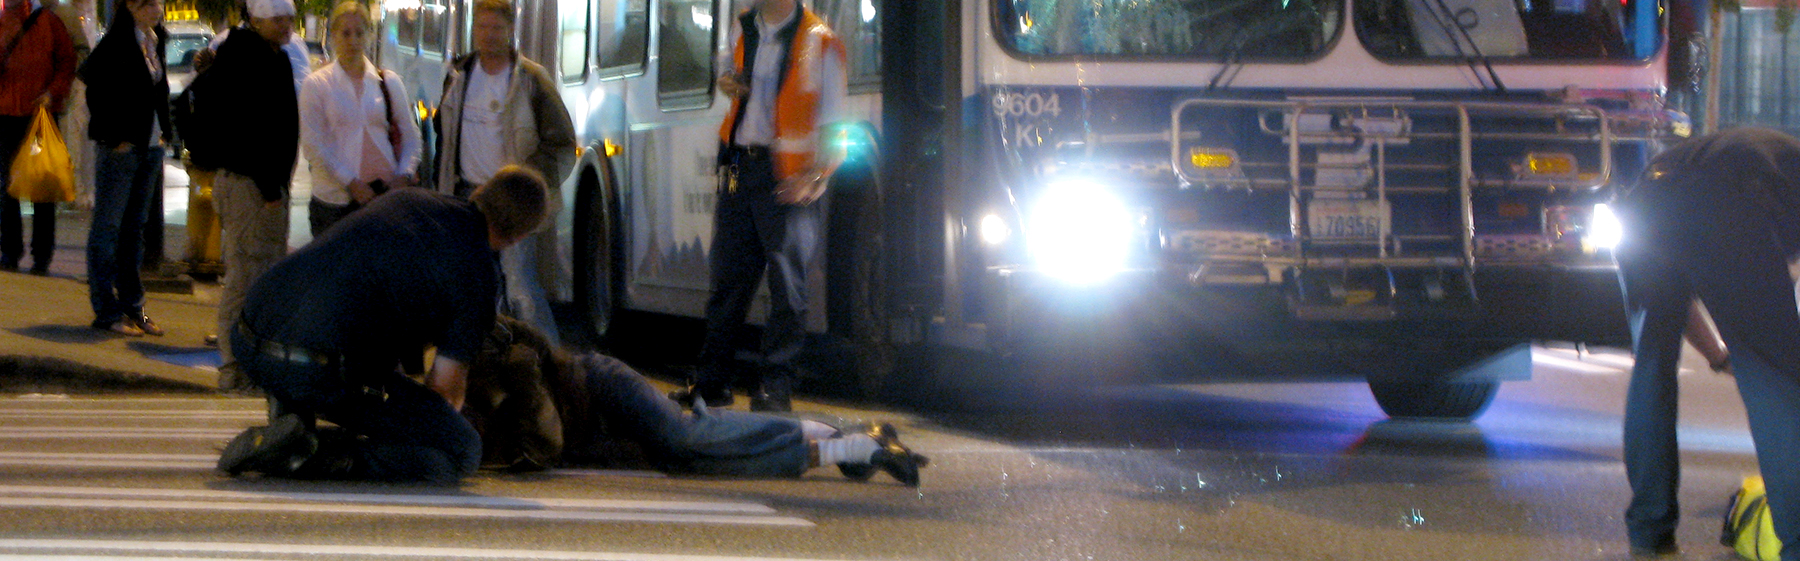 Roeser Law Firm PLLC: Public Transportation Injury Accident Lawyer